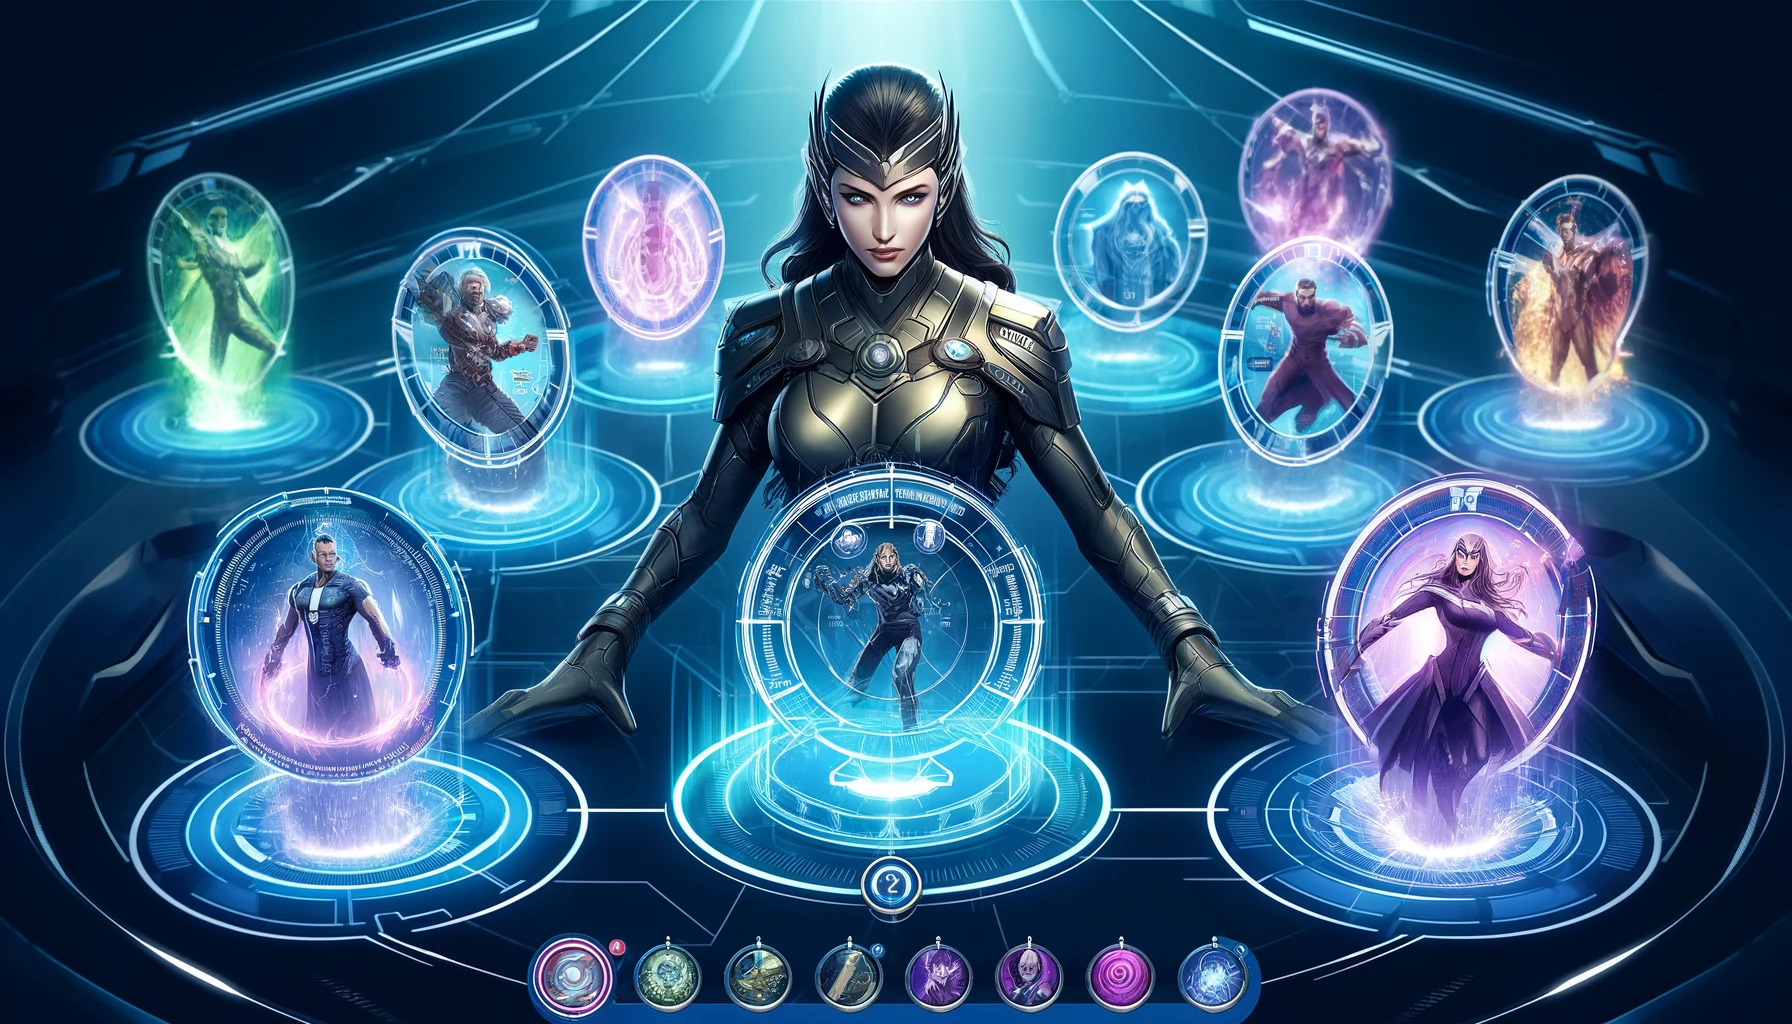 Nocturne is depicted in a high-tech lab with holographic interfaces showing Odin and Wave, highlighting her strategic combinations with other Marvel Snap cards and emphasizing tactical gameplay.